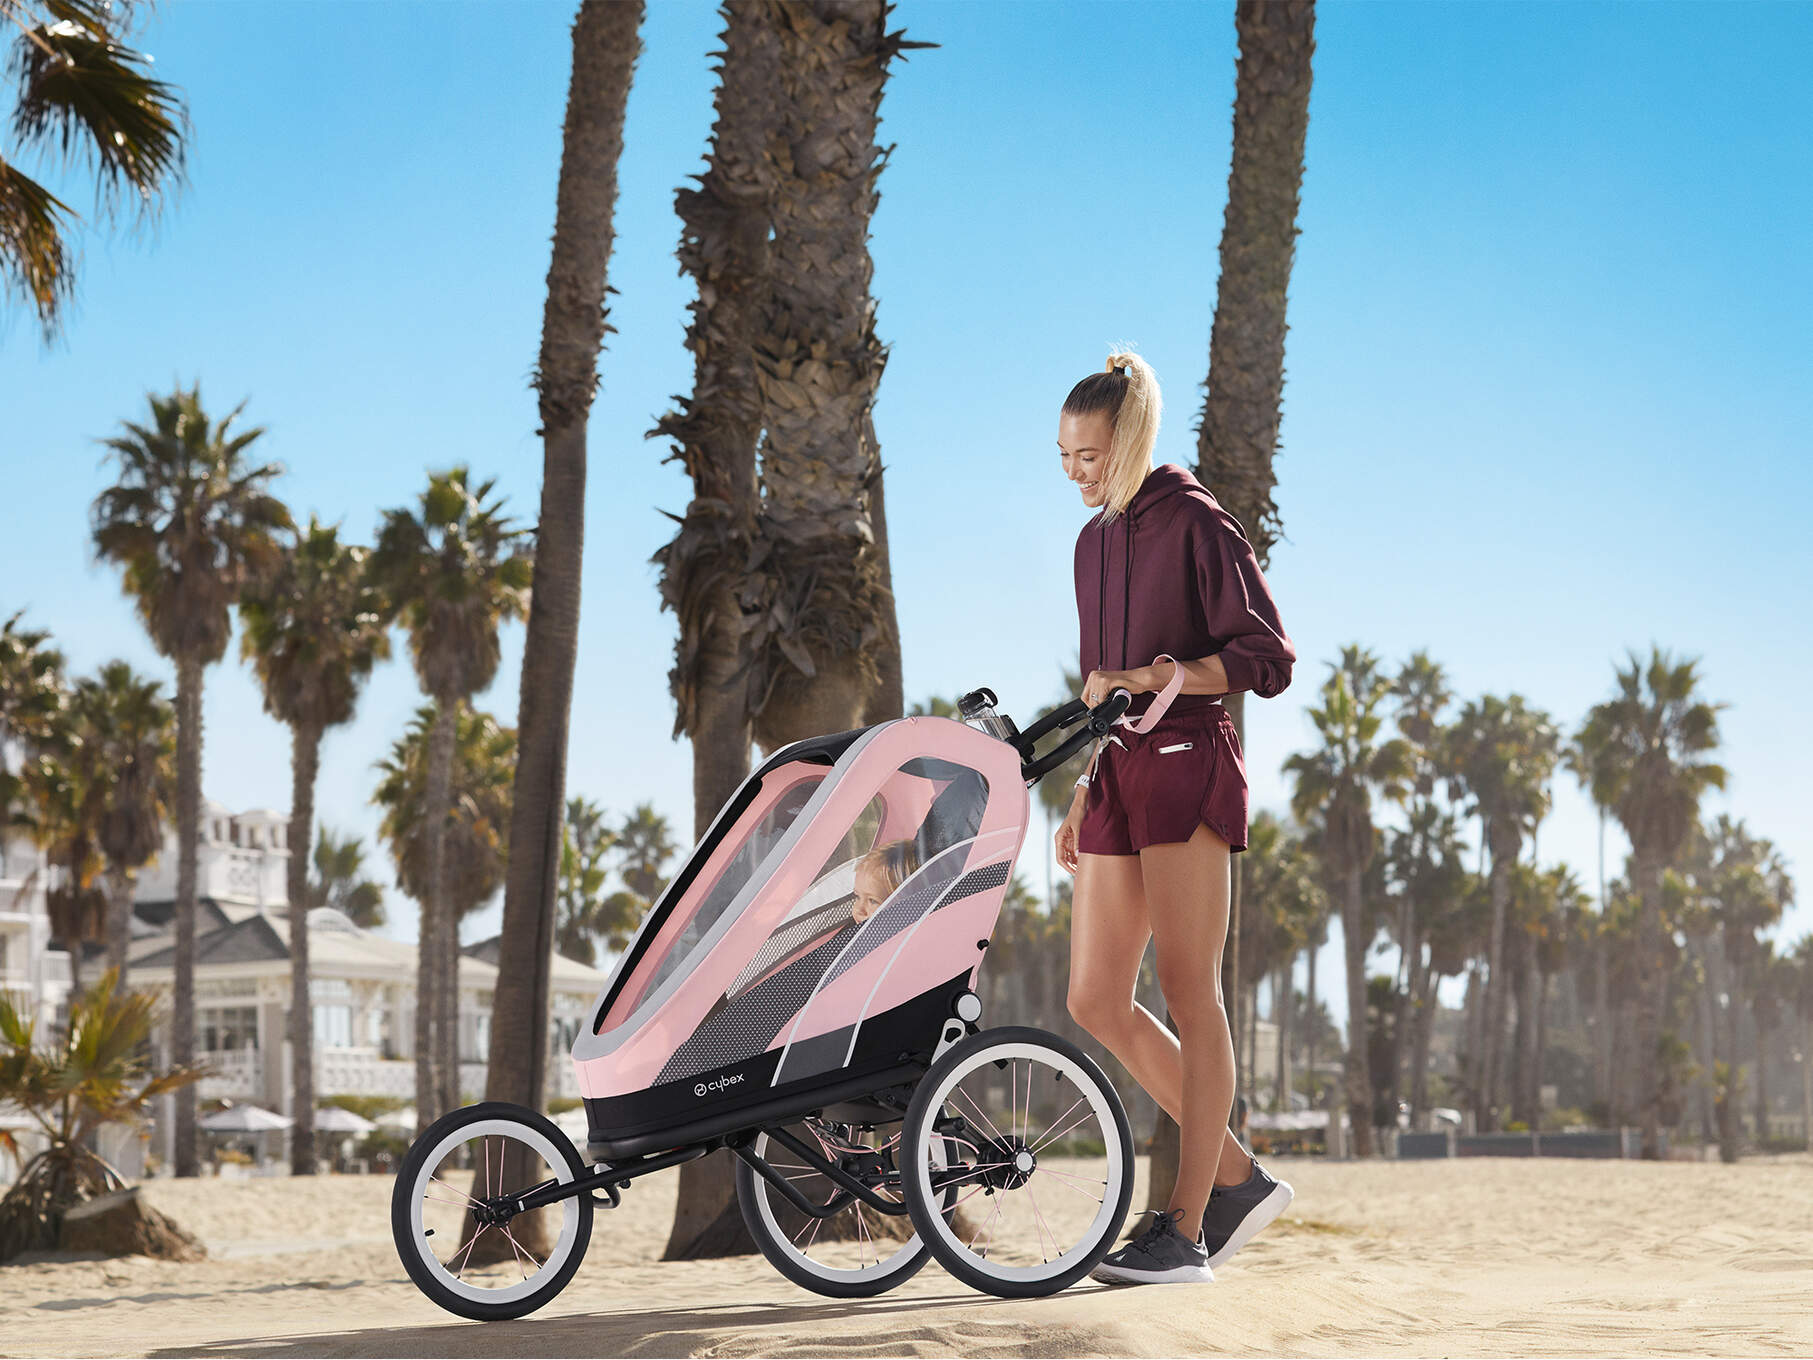 Cybex Gold Sport Zeno Pushchairs Carousel Campaign Image